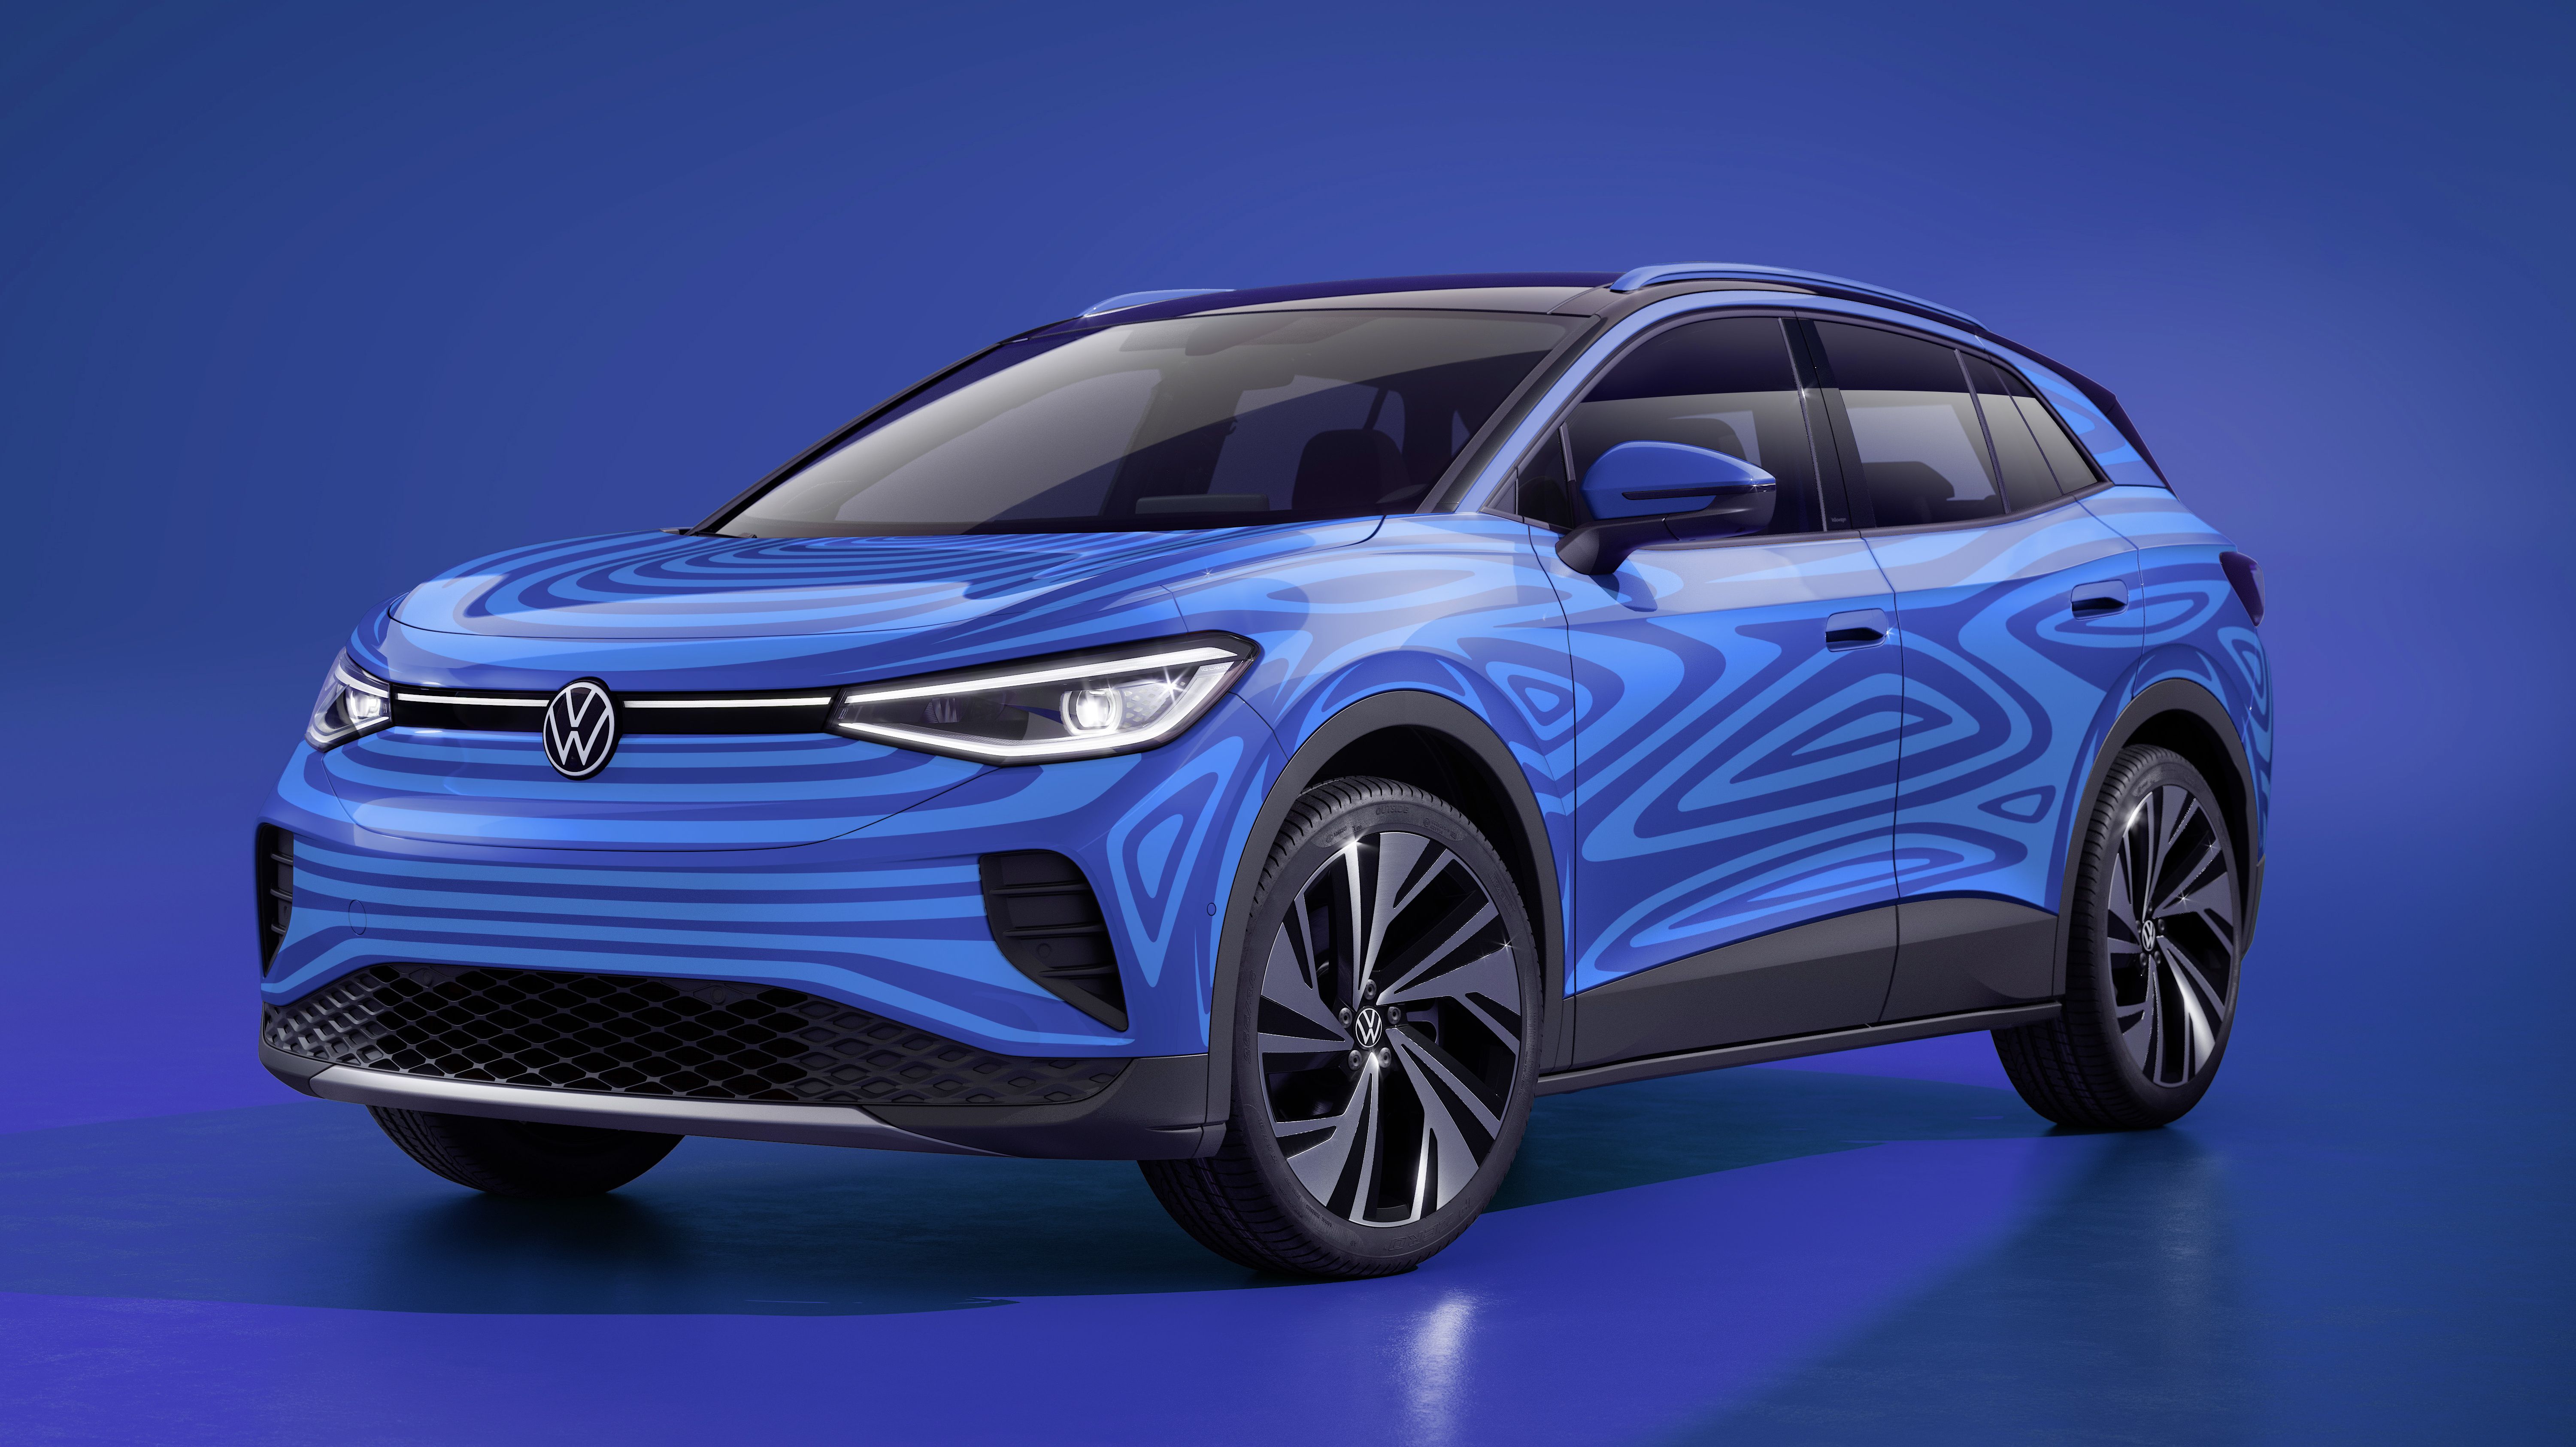 2020 The Volkswagen ID.4 Doesn't Look All Bad, but Something Doesn't Feel Right